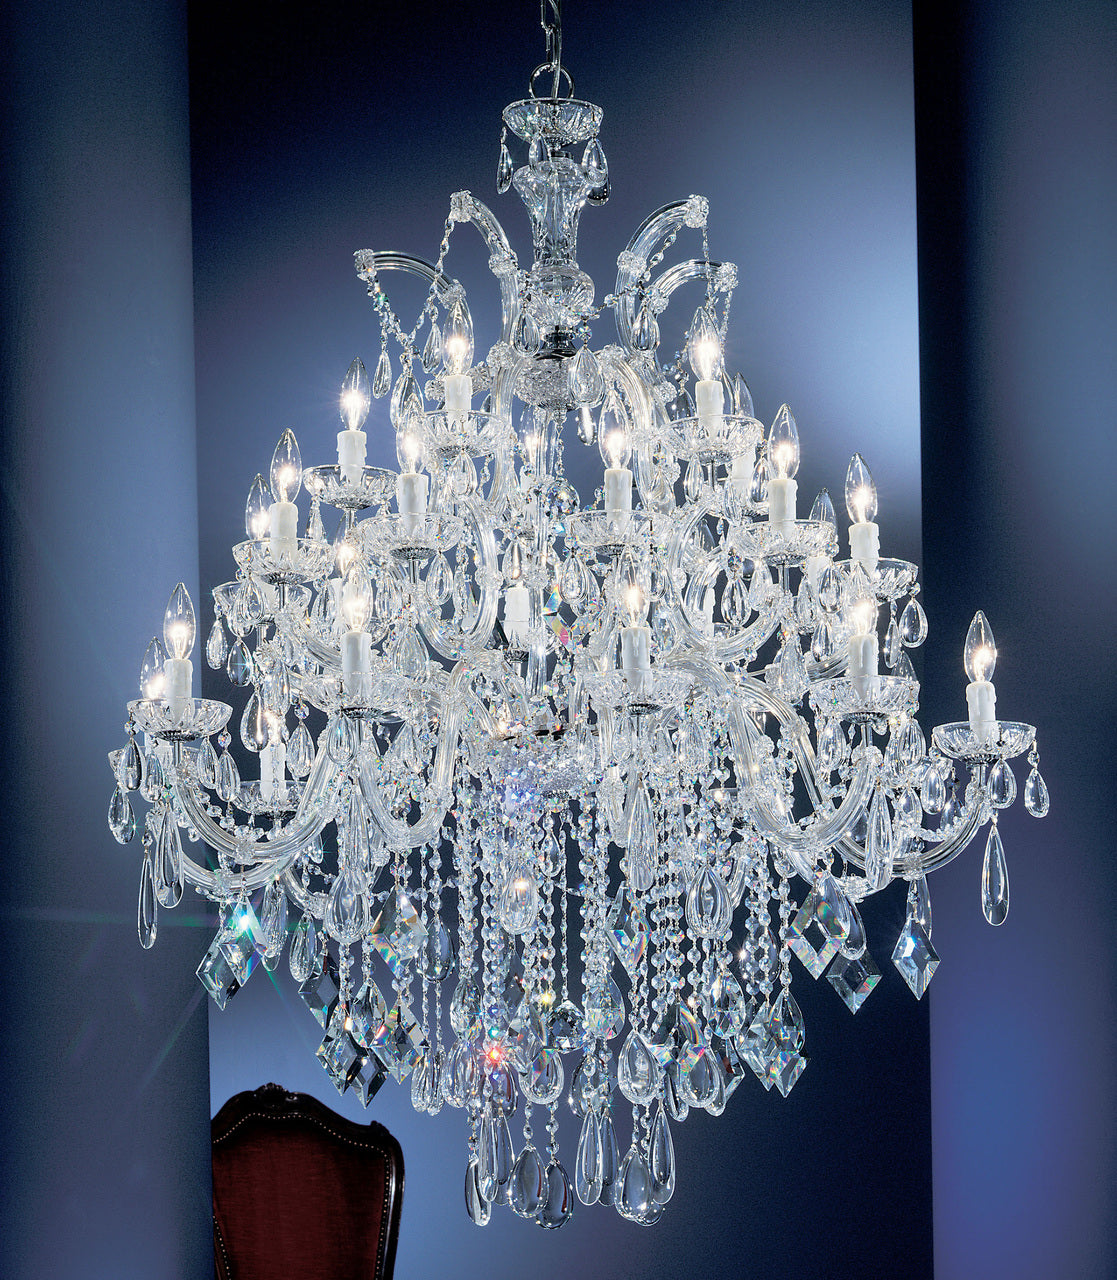 Classic Lighting 8359 CH C Rialto Contemporary Crystal Chandelier in Chrome